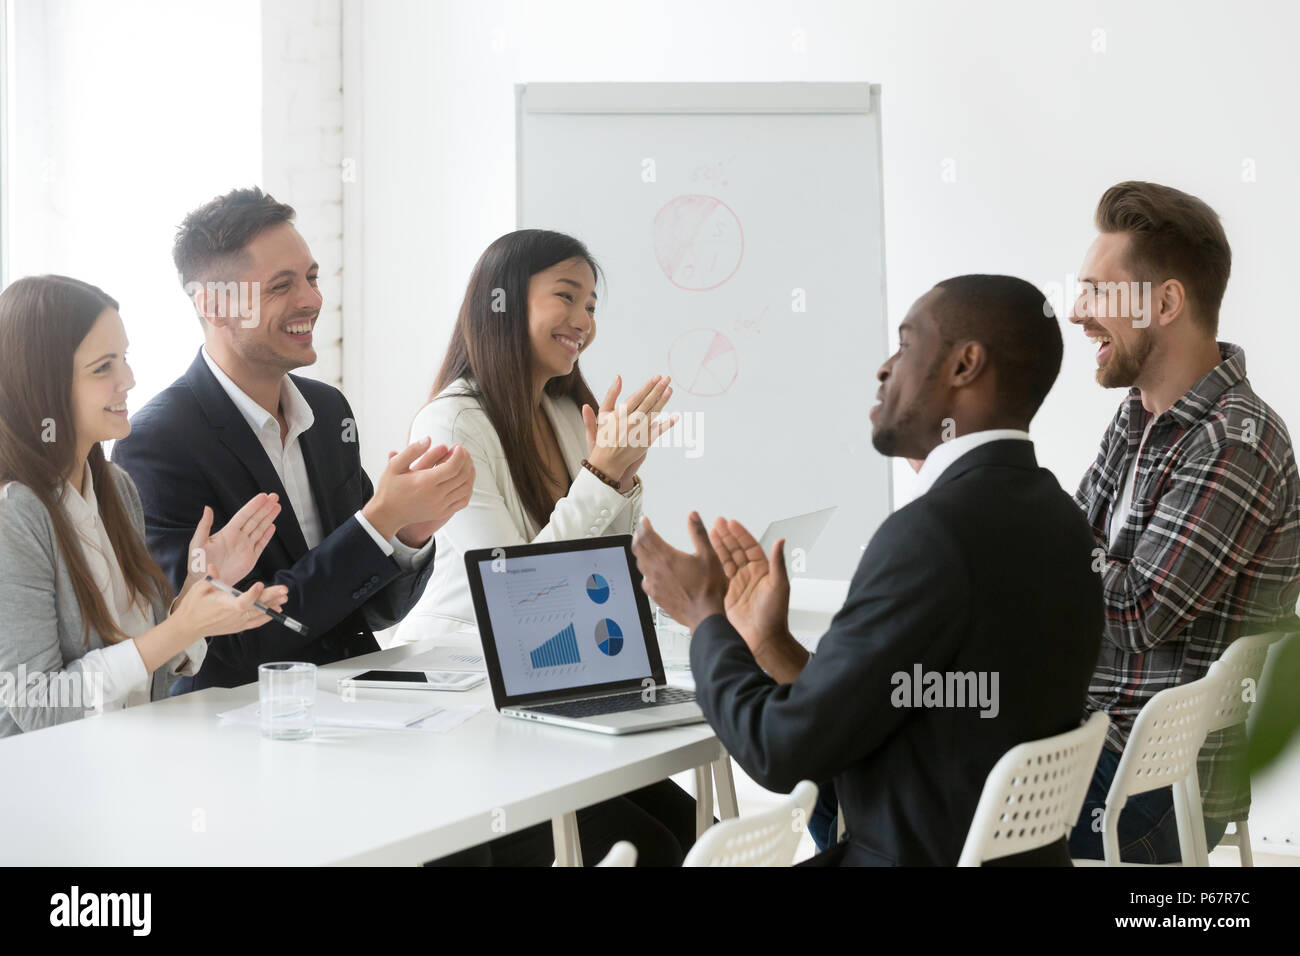 Excited diverse team applauding celebrating shared goal achievem Stock Photo